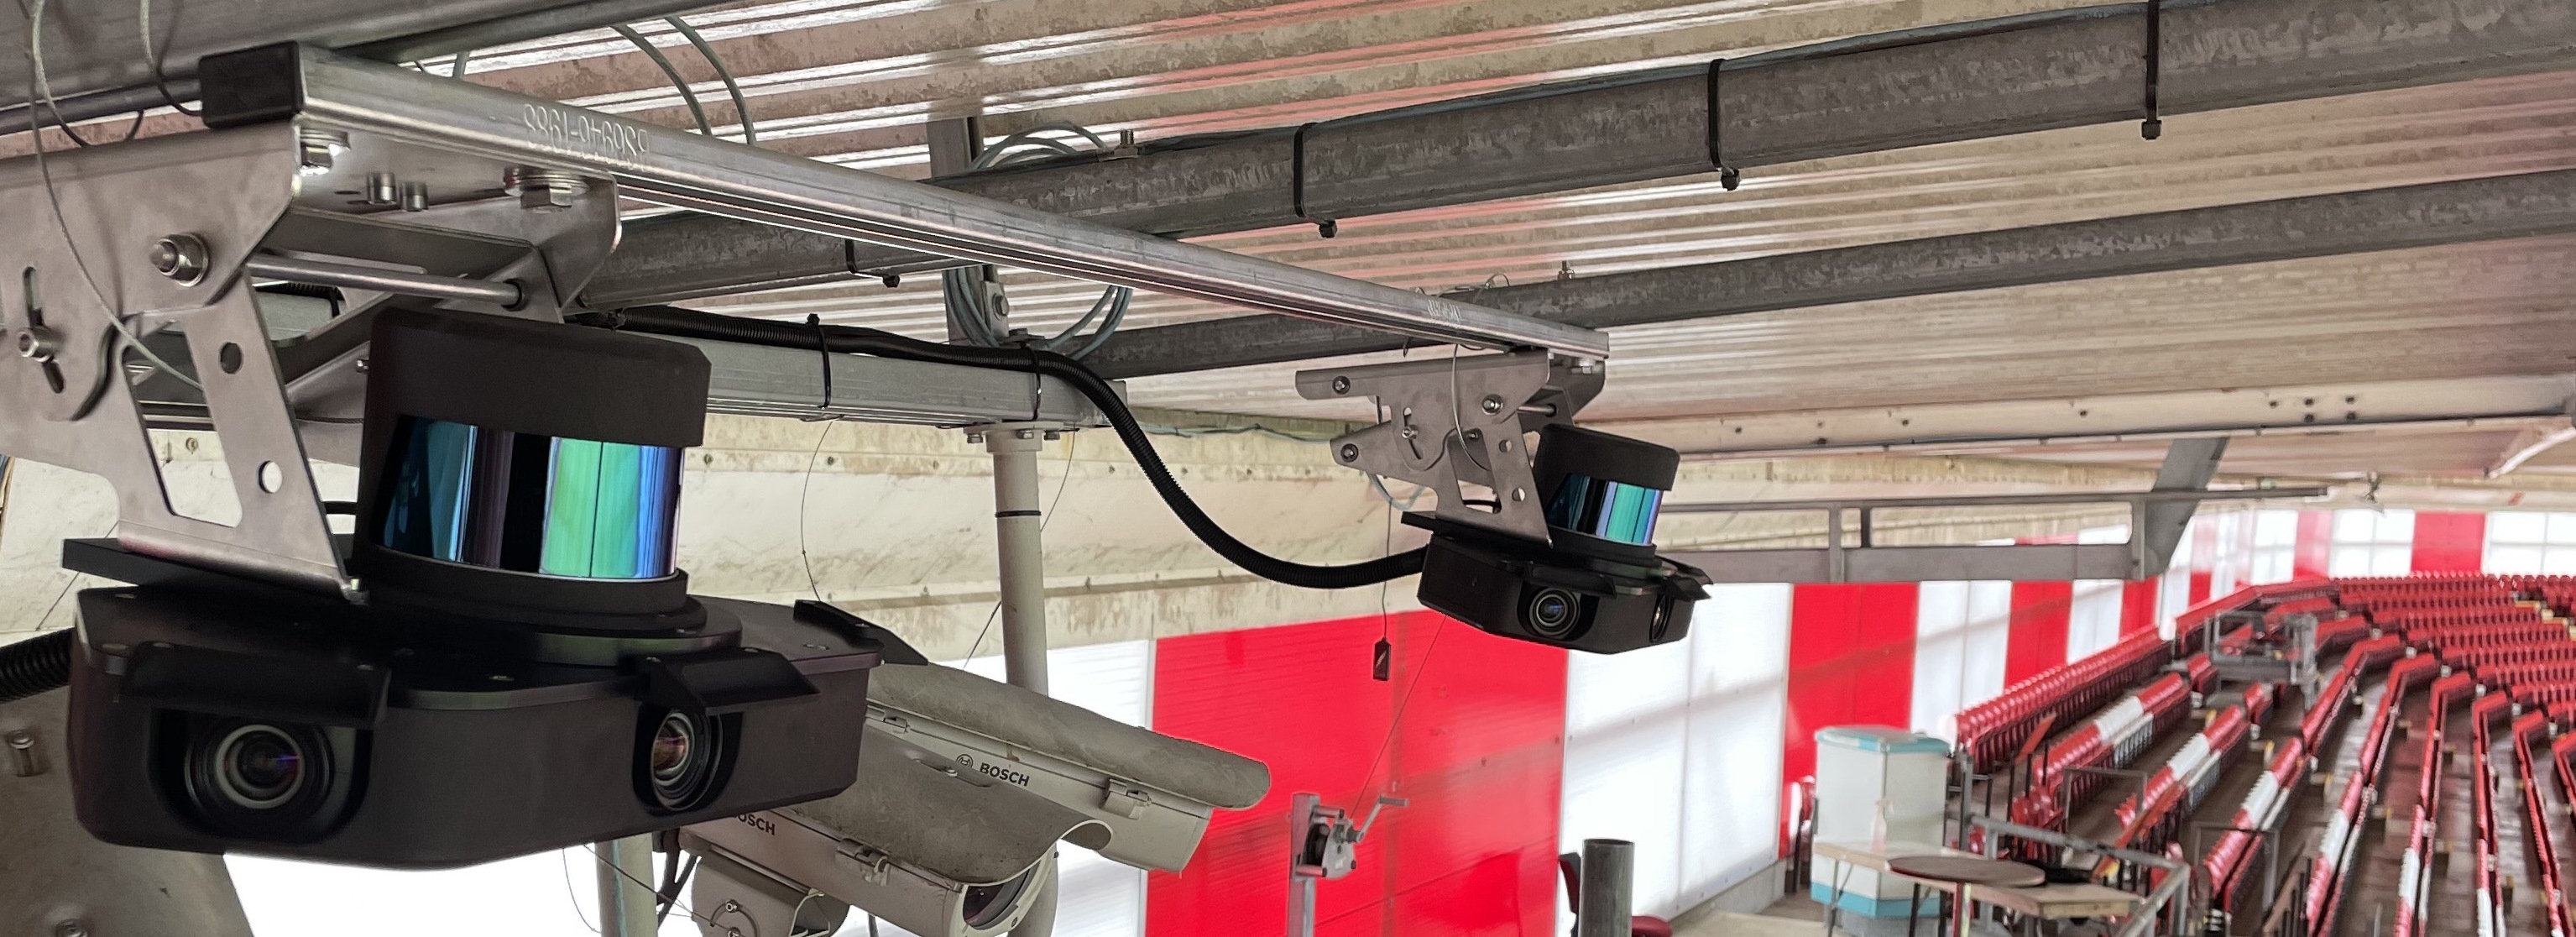 The Sportlight system at St Mary's Stadium. There are two LiDAR cameras. Each has a shiny LiDAR sensor, which is tracking everything that happens on the pitch in 3D. Underneath are three cameras that use computer vision to identify players. 